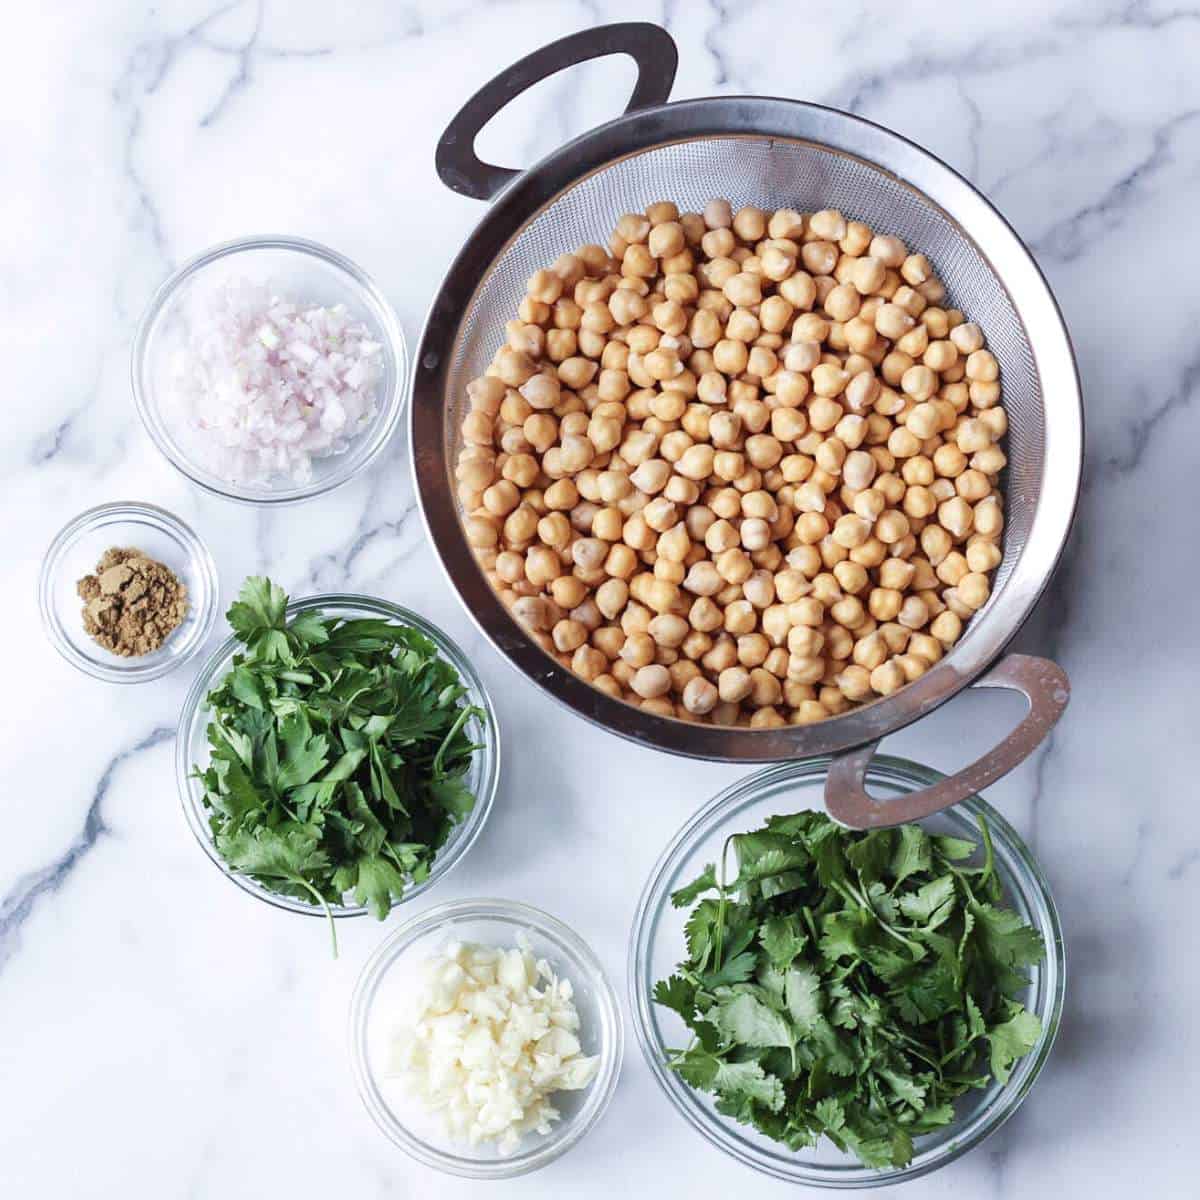 Ingredients to make baked falafels: chickpeas, shallots, cloves, parsley, cilantro, and spices.